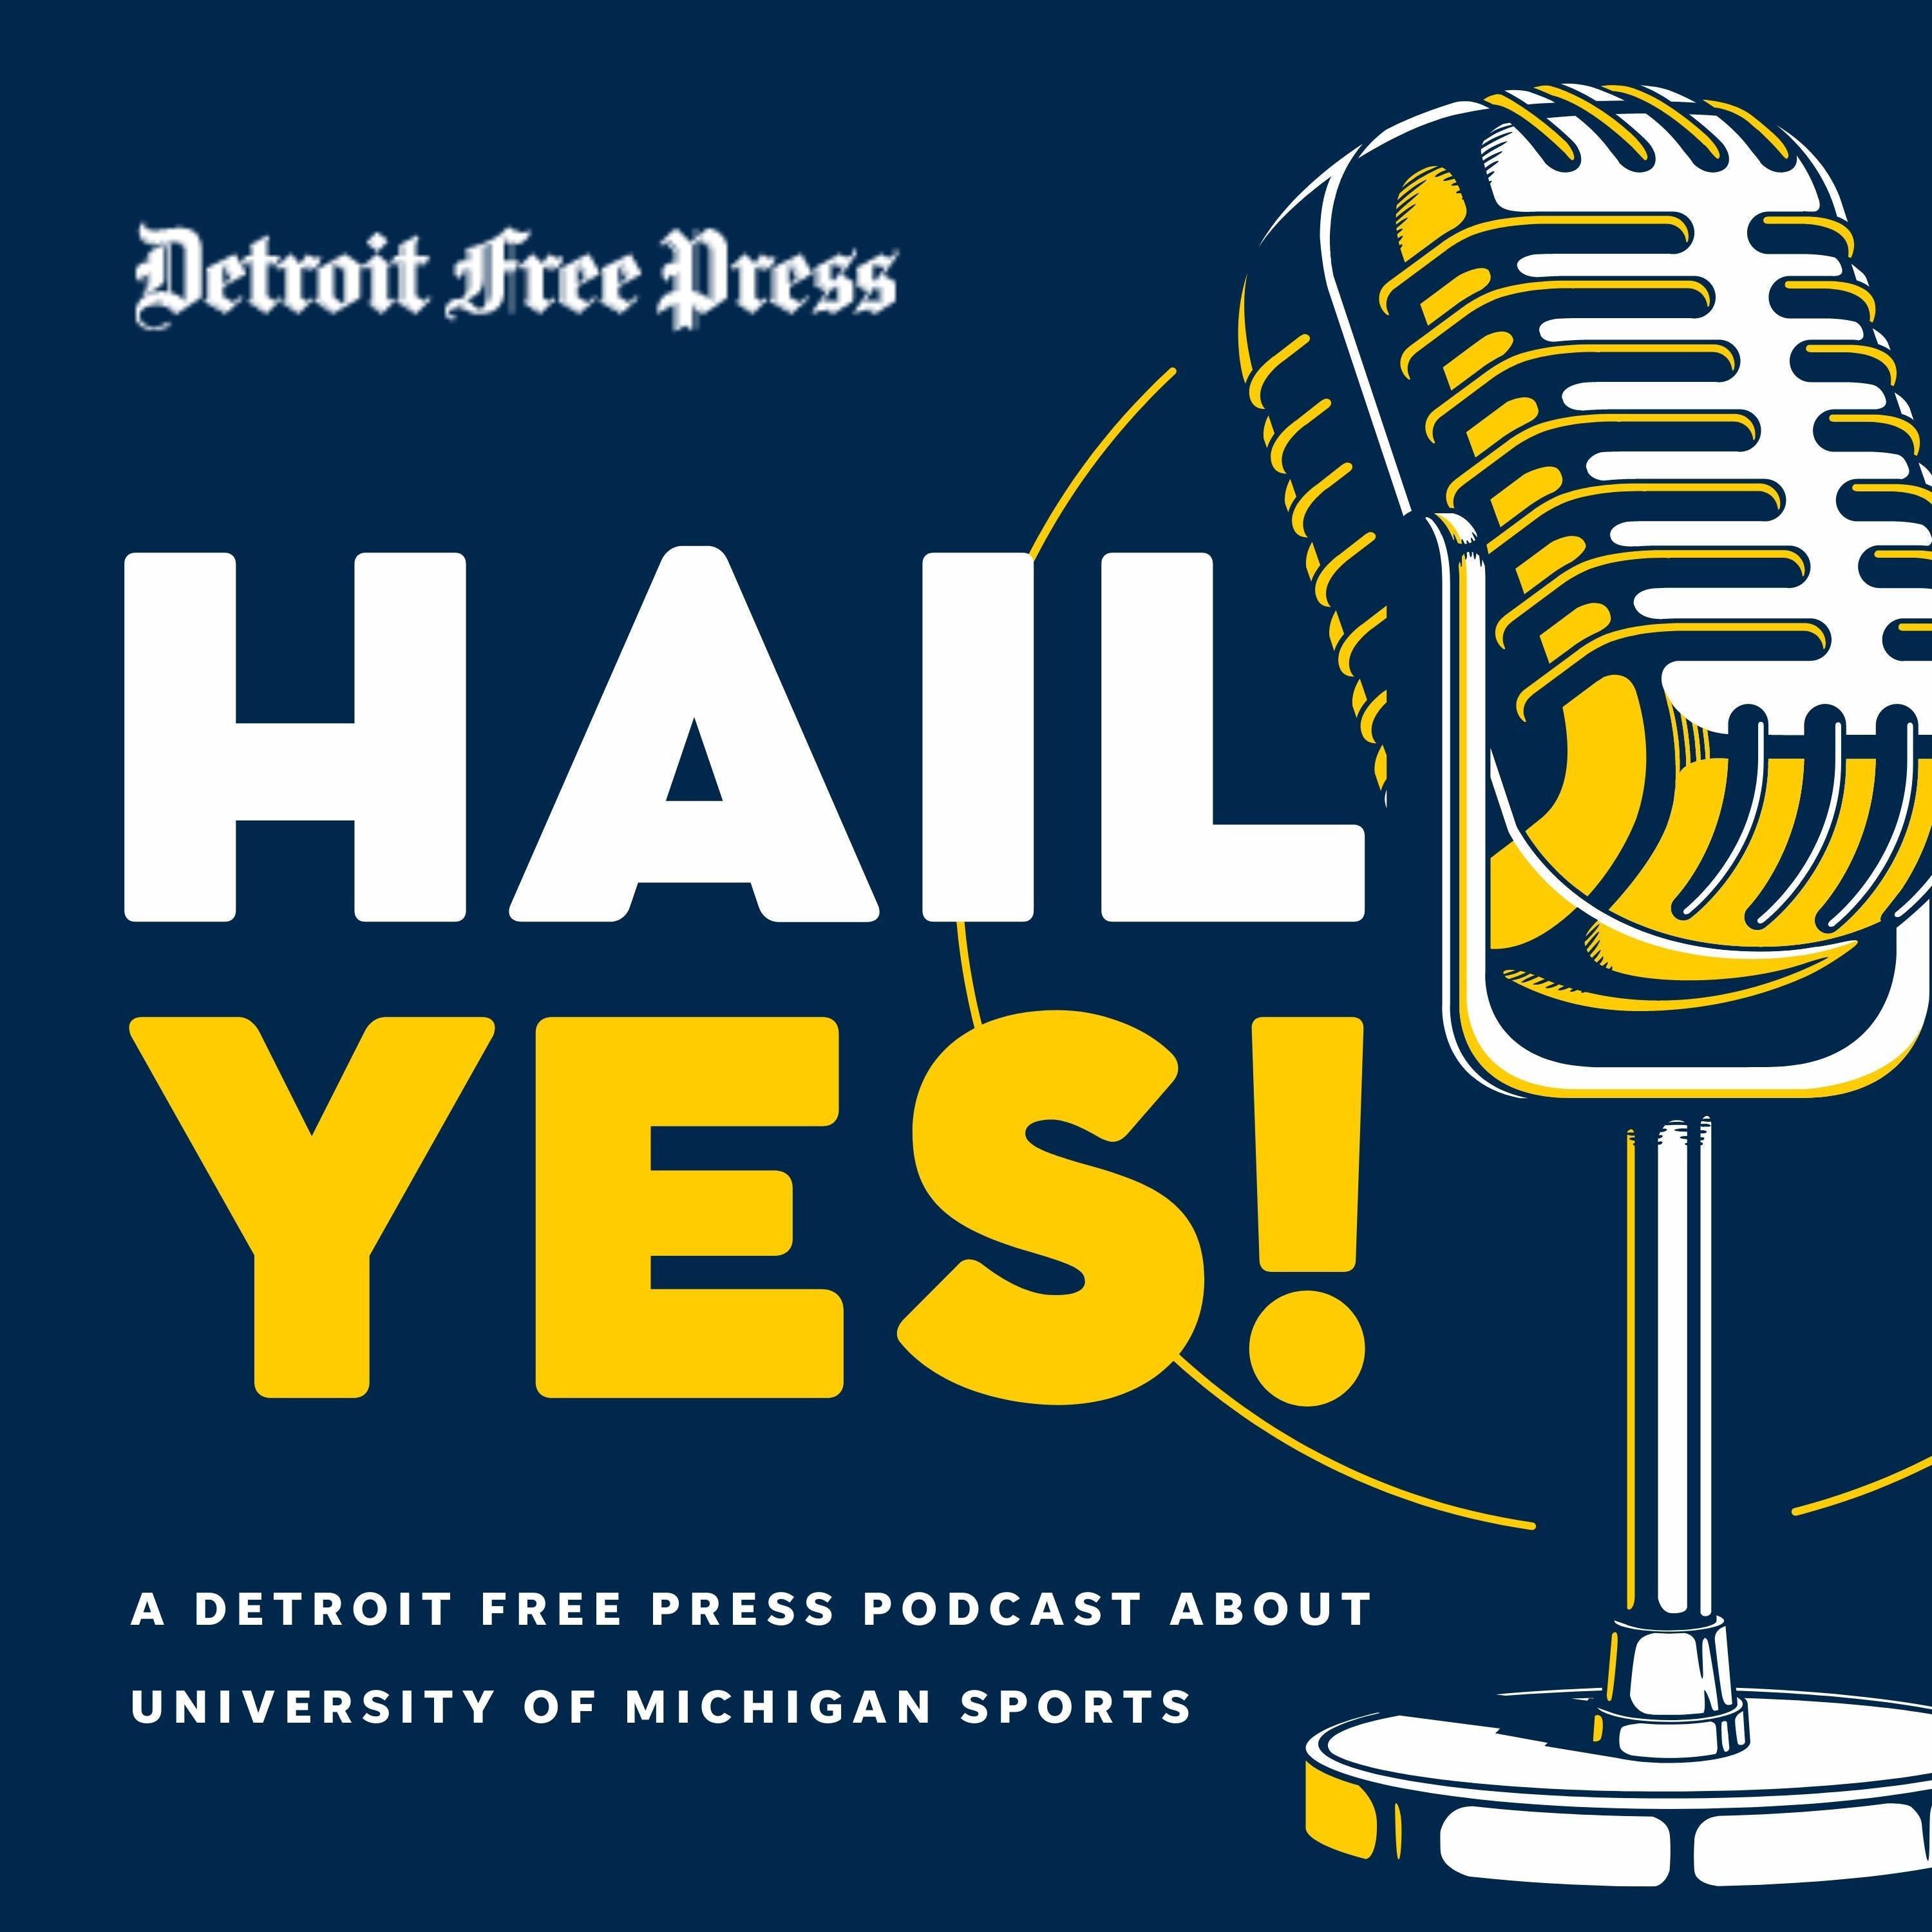 hail-yes-michigan-football-dominant-again-vs-indiana-will-msu-actually-provide-test